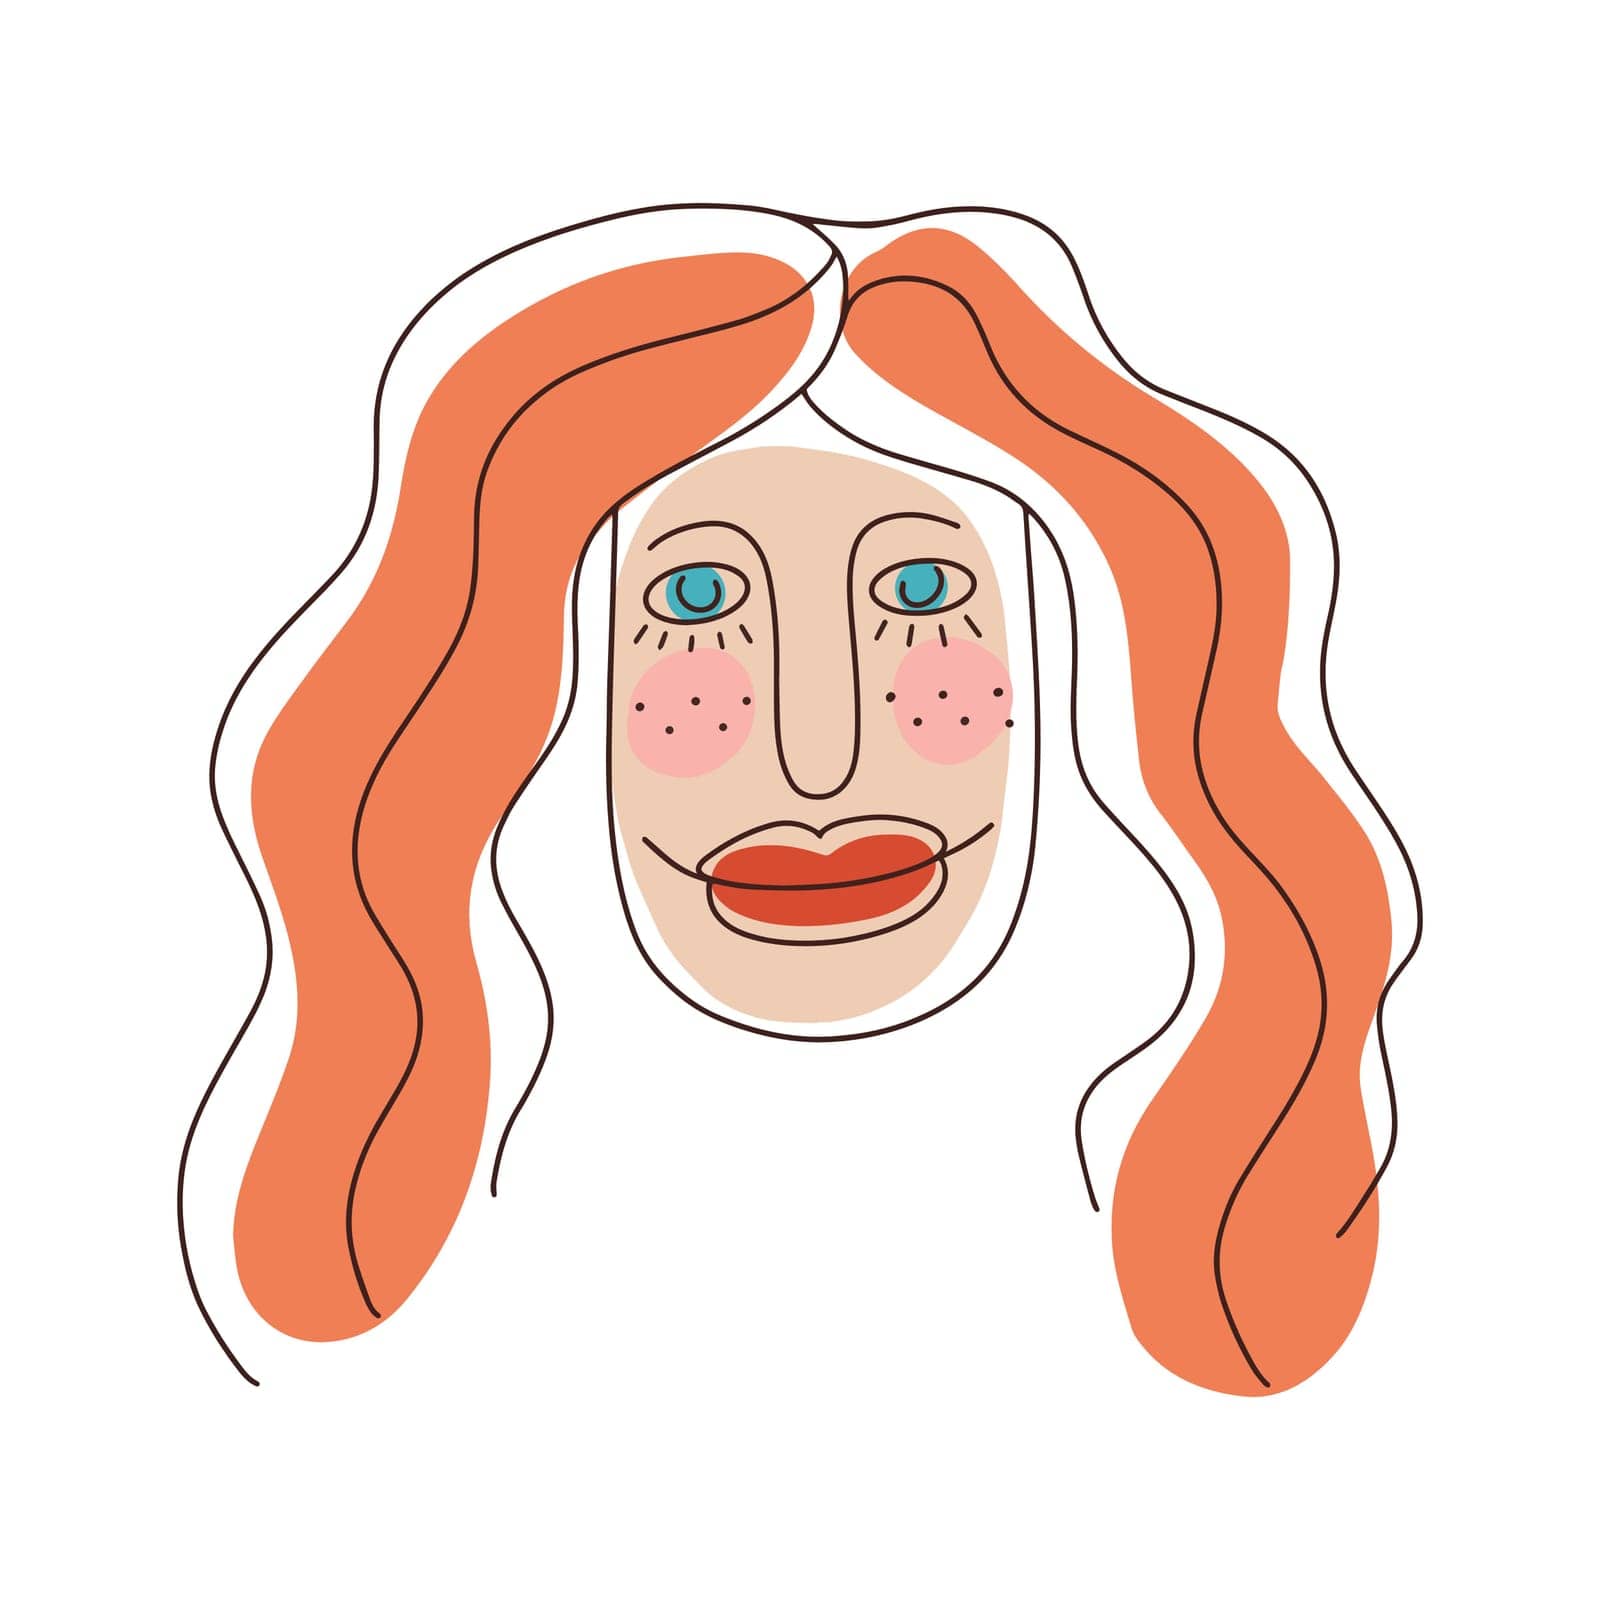 Portrait of a woman in a minimalistic linear style by Dustick